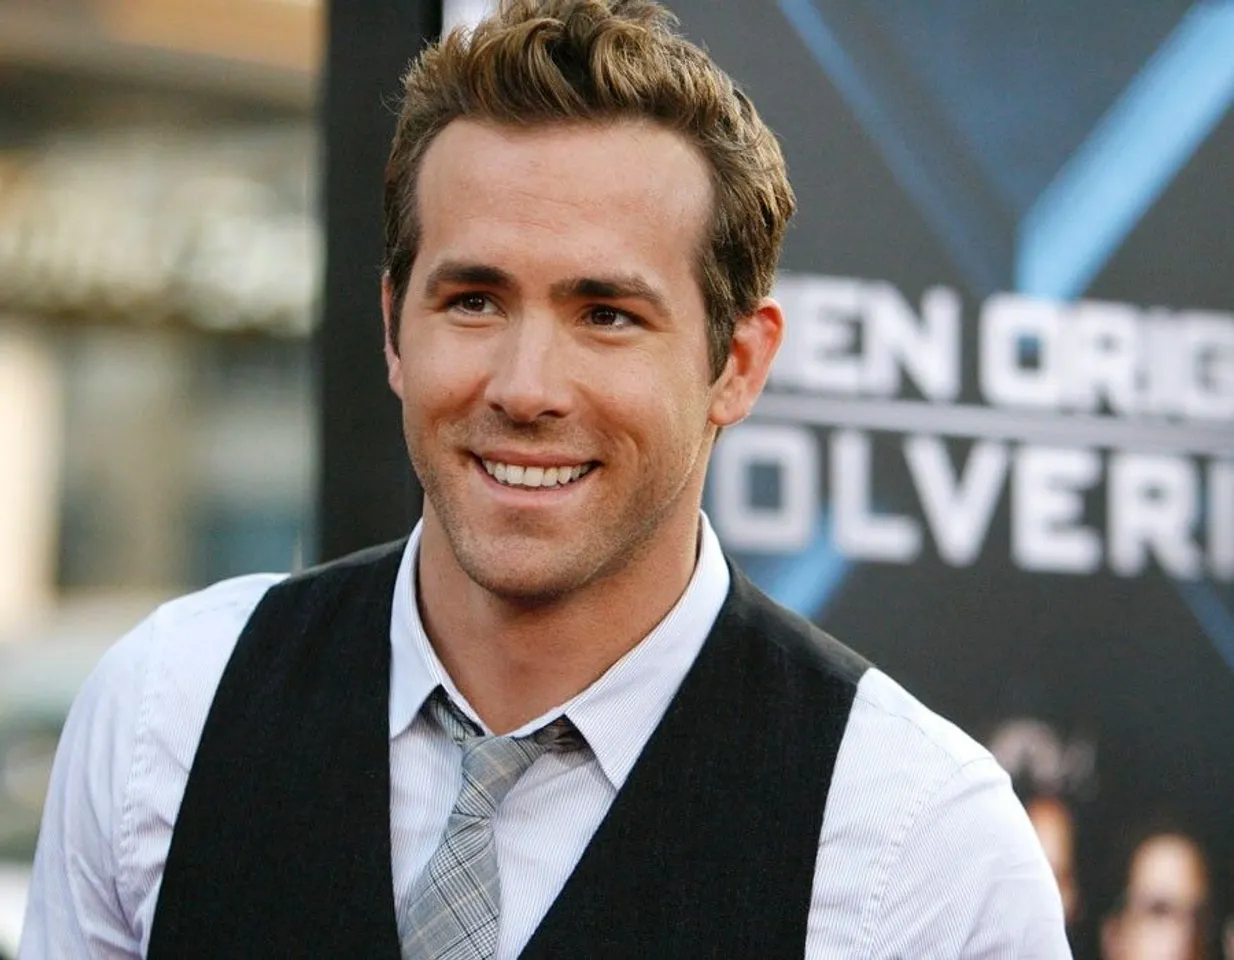 13 HILARIOUS TWEETS BY RYAN REYNOLDS THAT PROVE HE'S THE COOLEST DAD ON THE PLANET